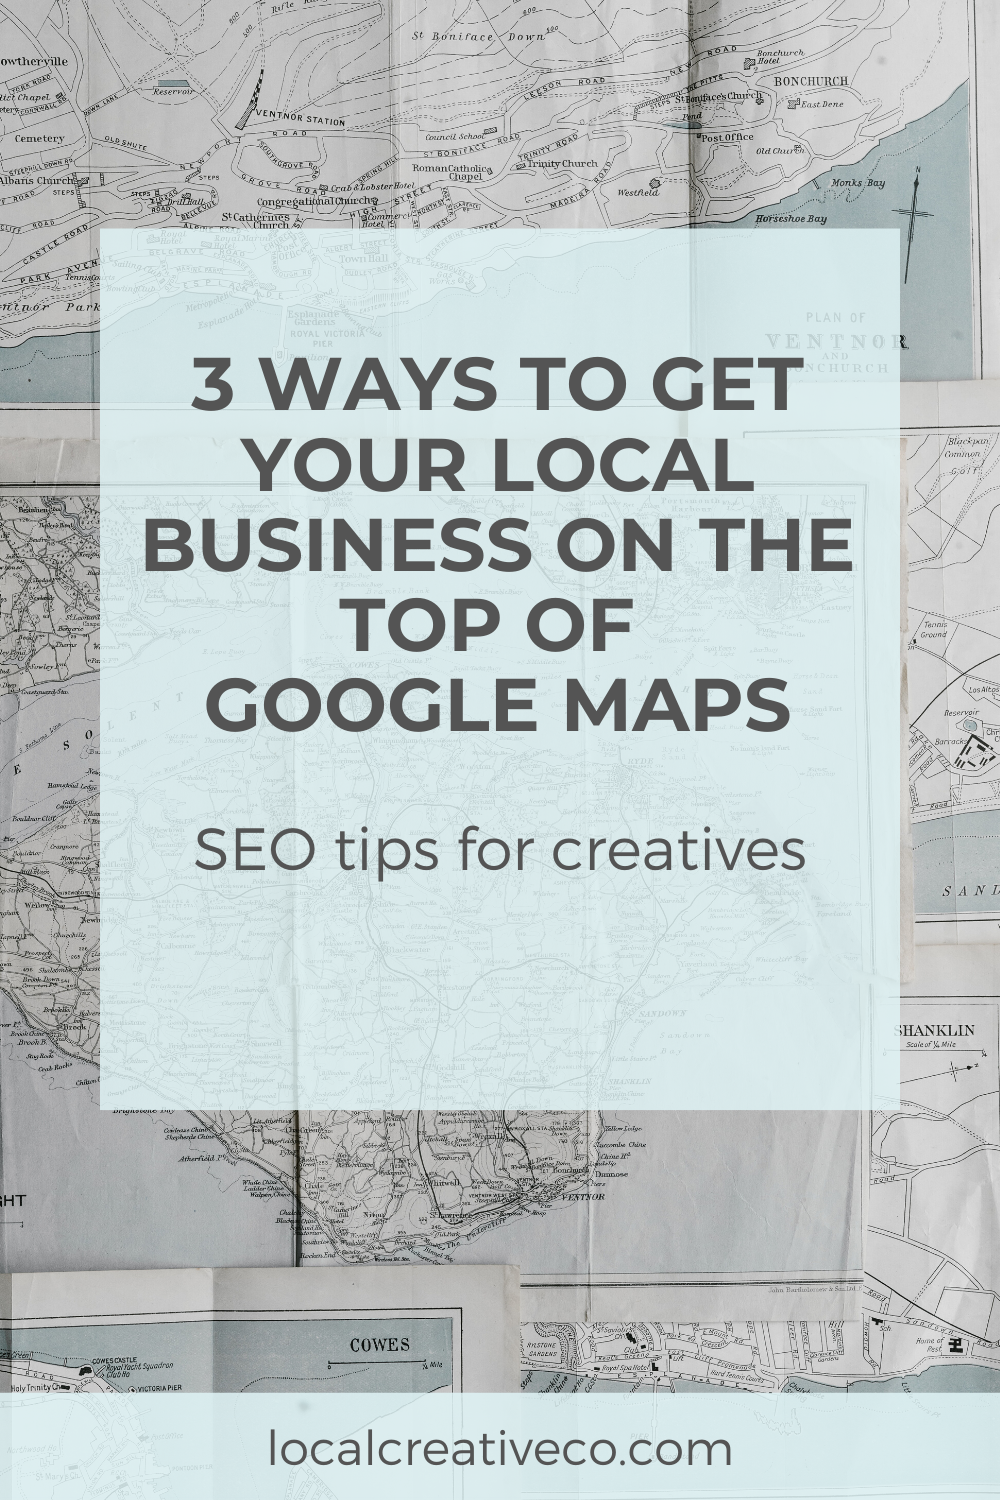 Ways for a Local Business to Get to the Top of Google Maps